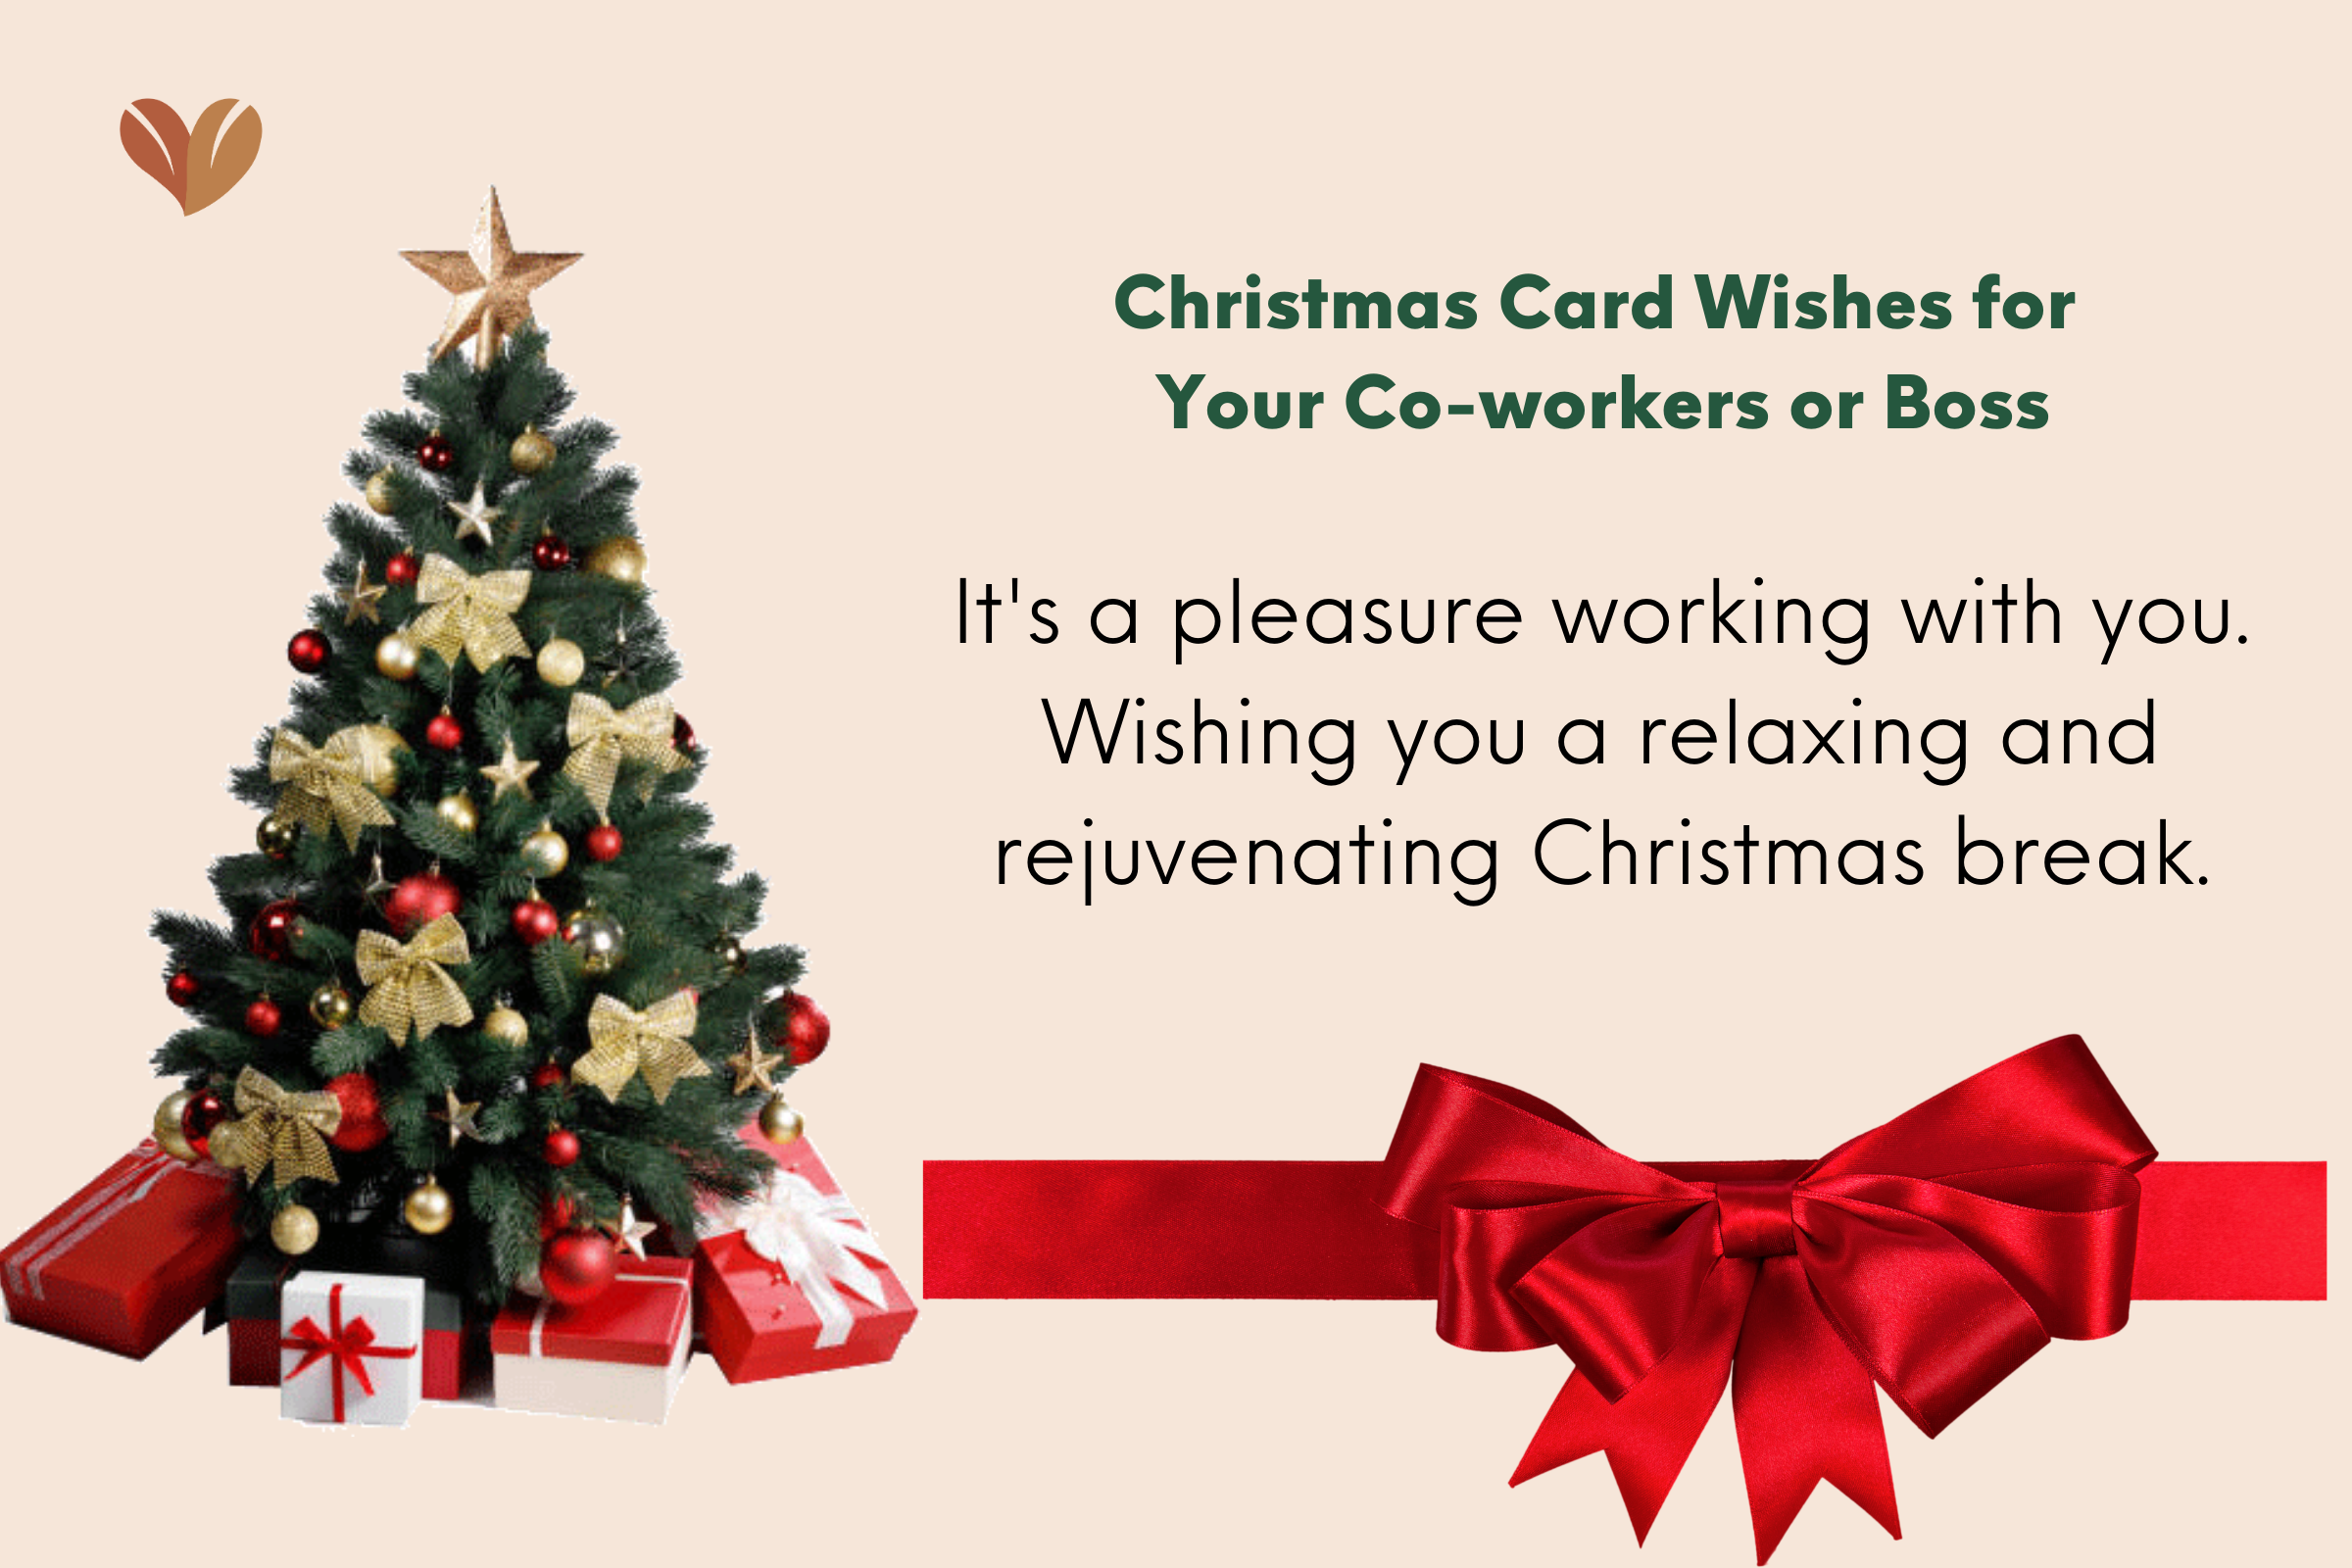 Christmas card wishes